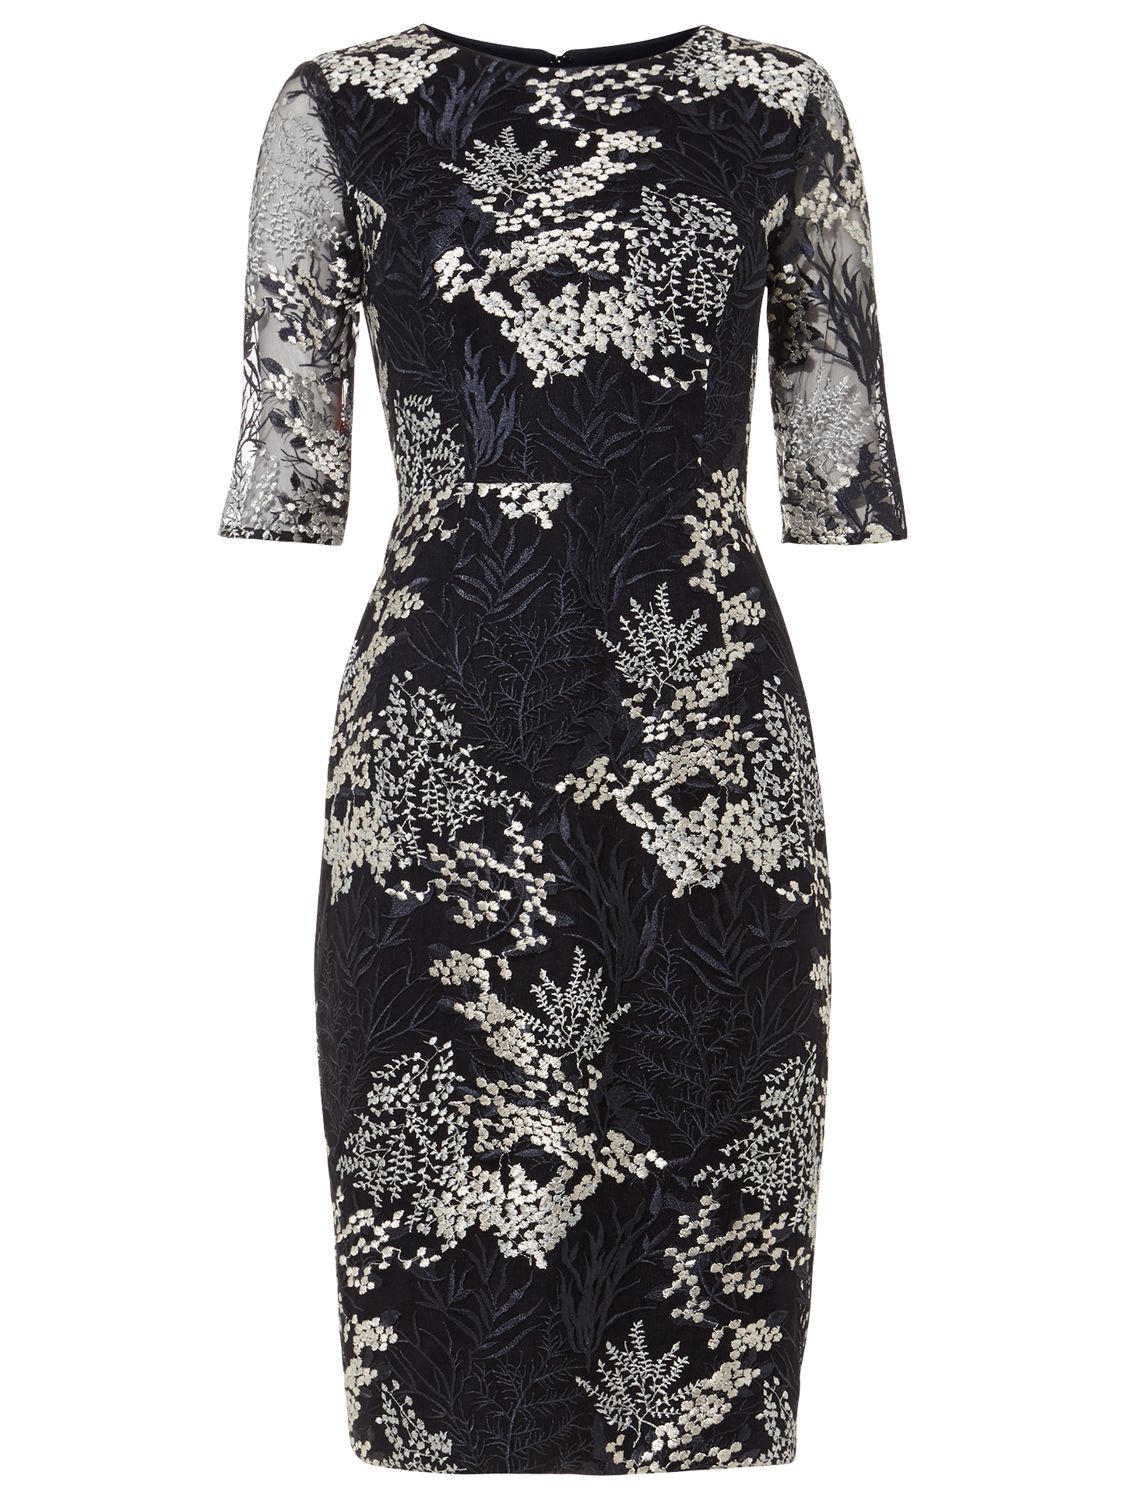 Phase Eight Fern Embroidered Dress, Navy/White